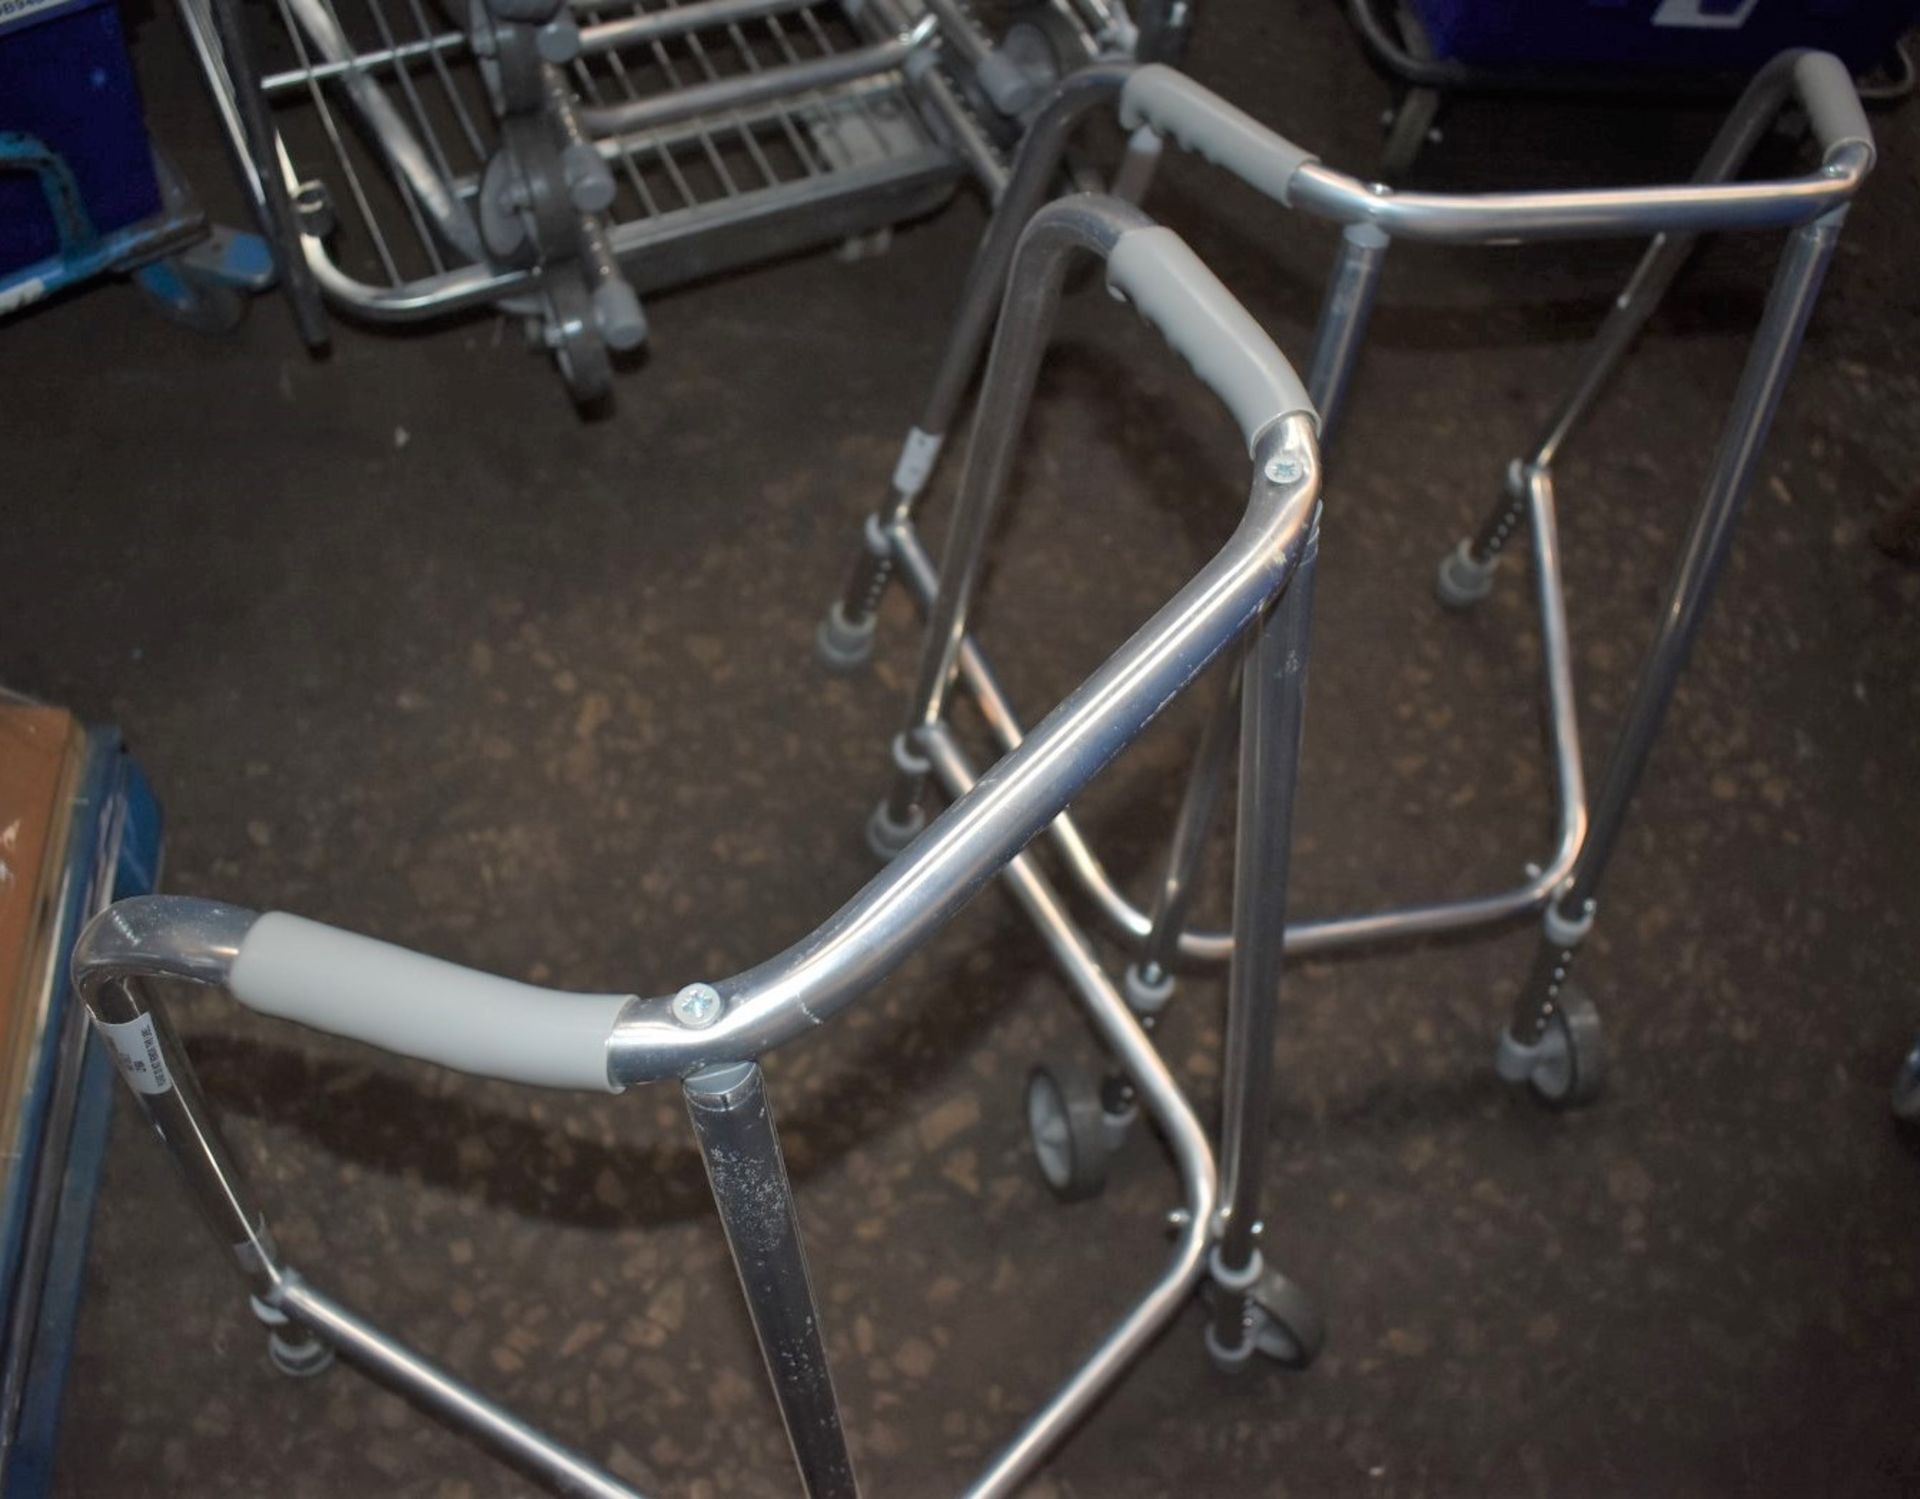 8 x Trulife Walking Aid Frames - Lightweight - Model RM563373 - Provided in Good Condition - - Image 3 of 4